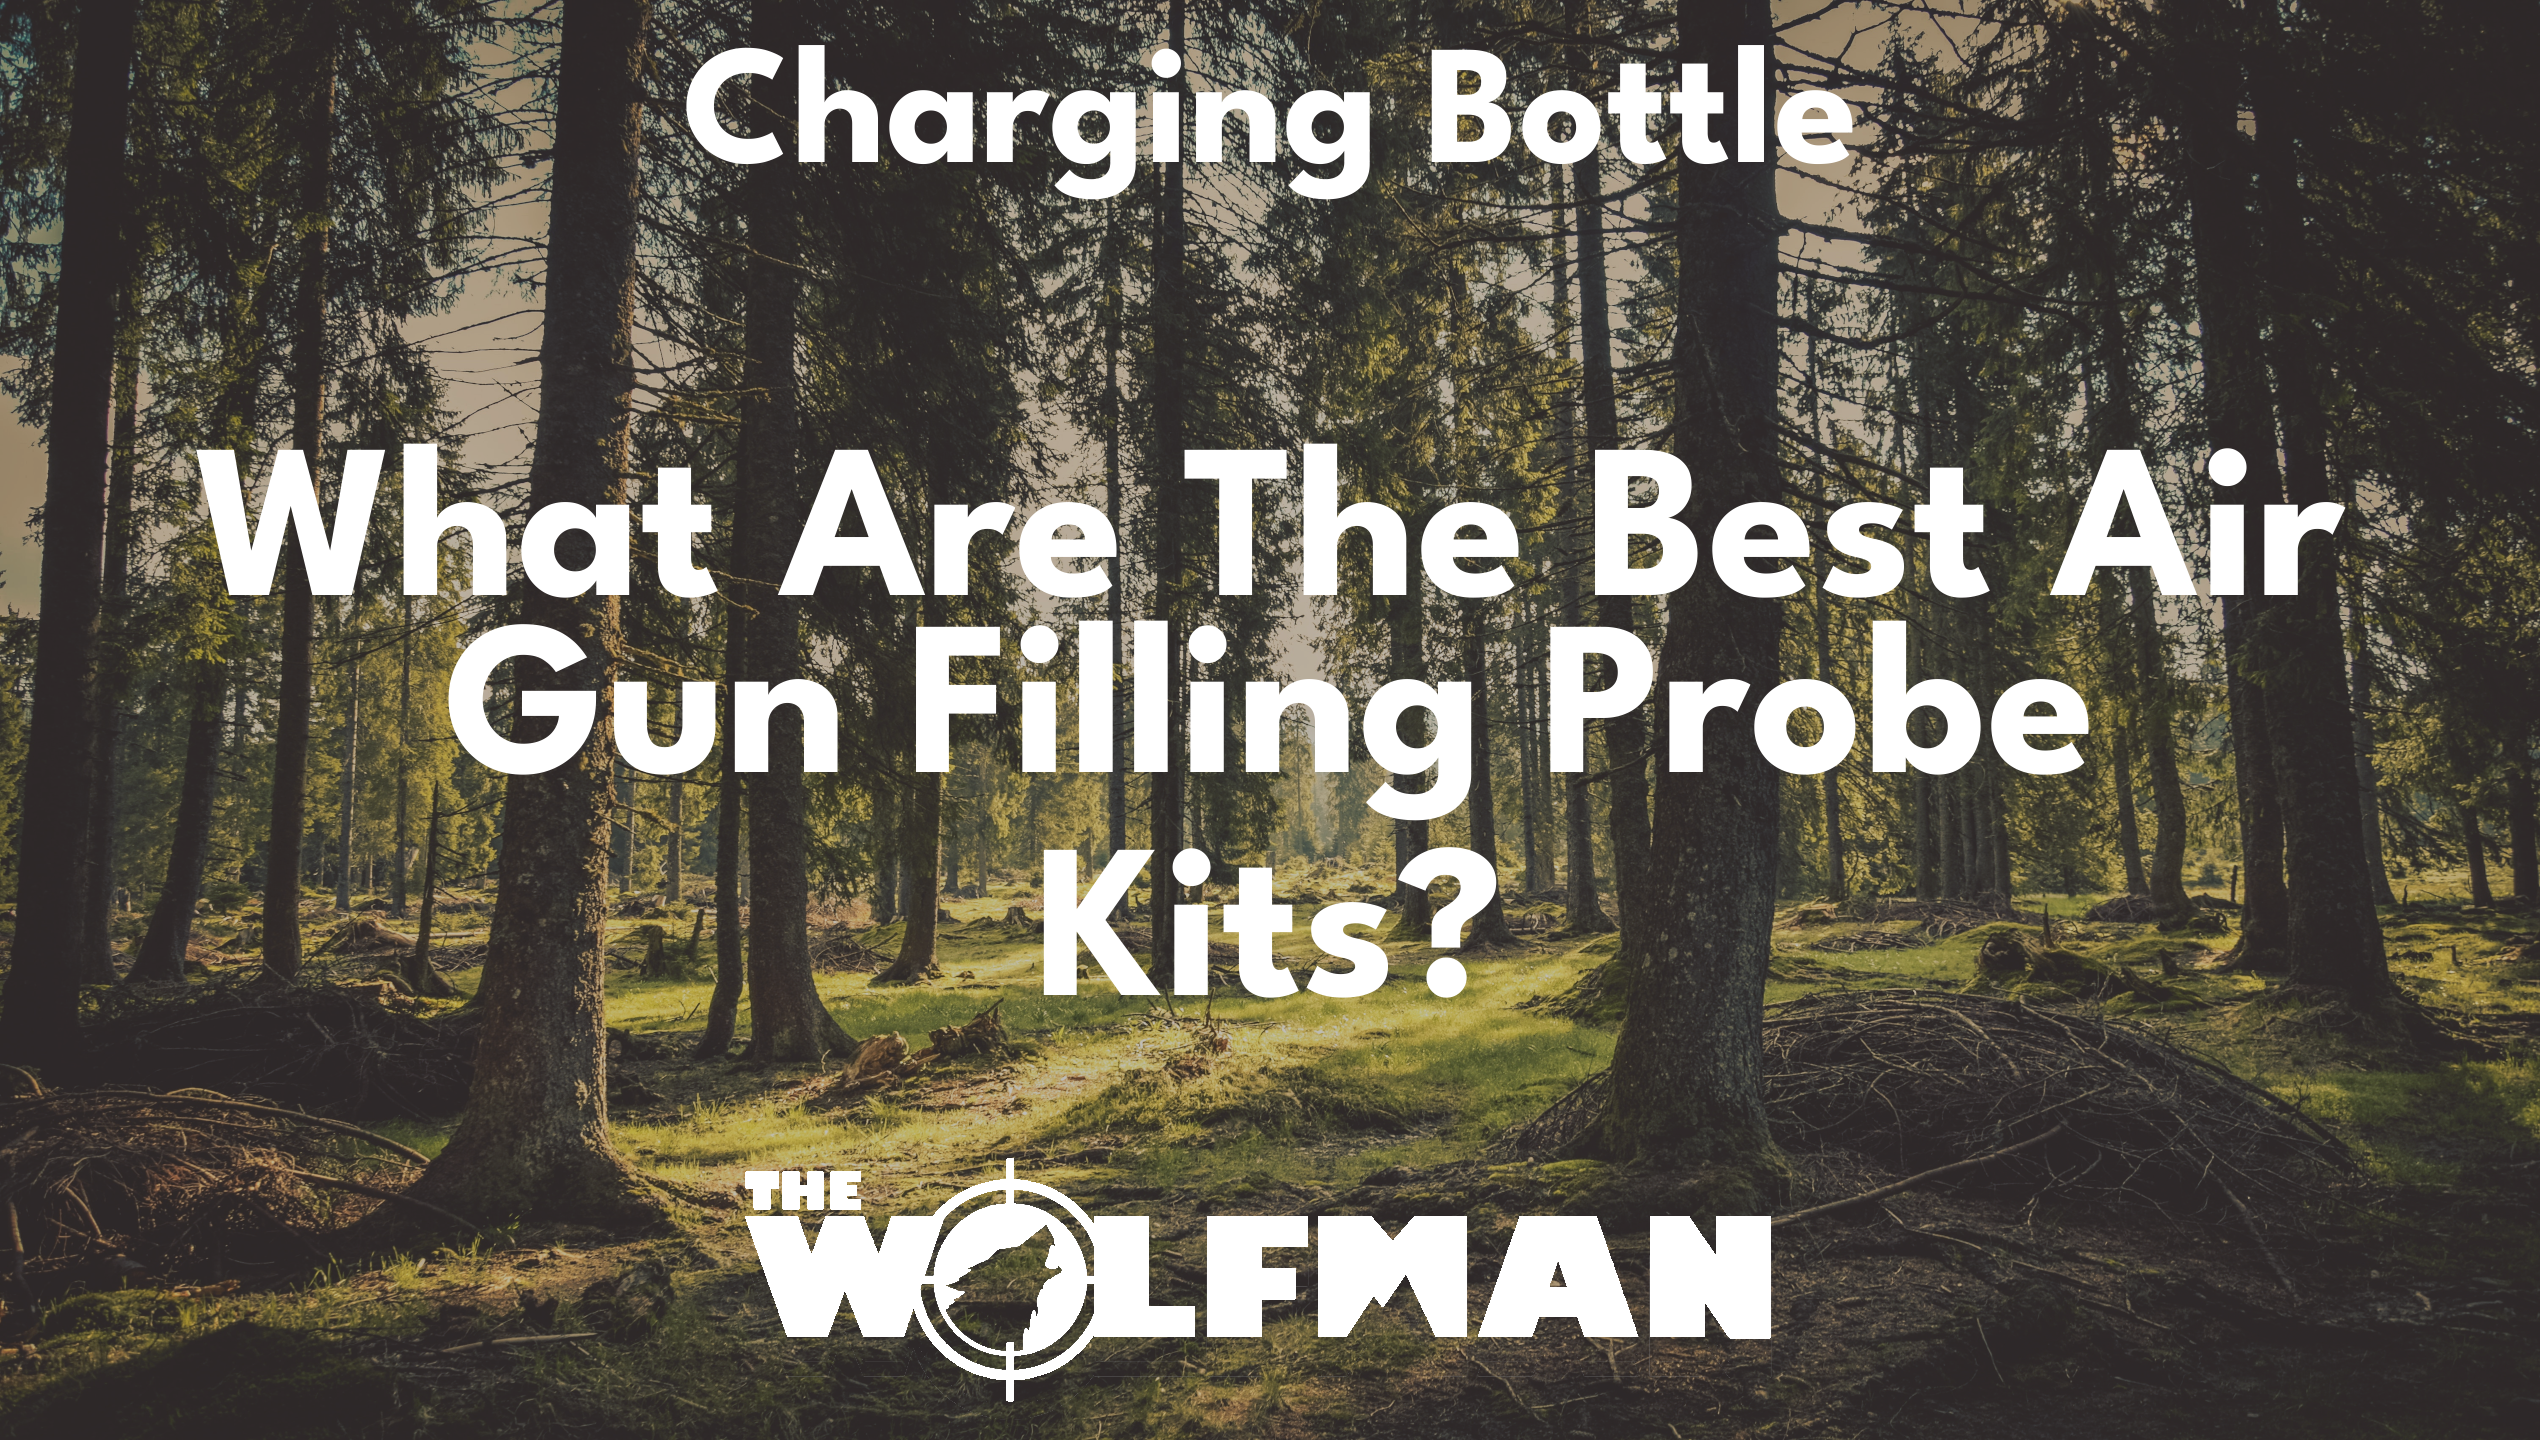 What Are The Best Air Gun Filling Probe Kits? — The Wolfman